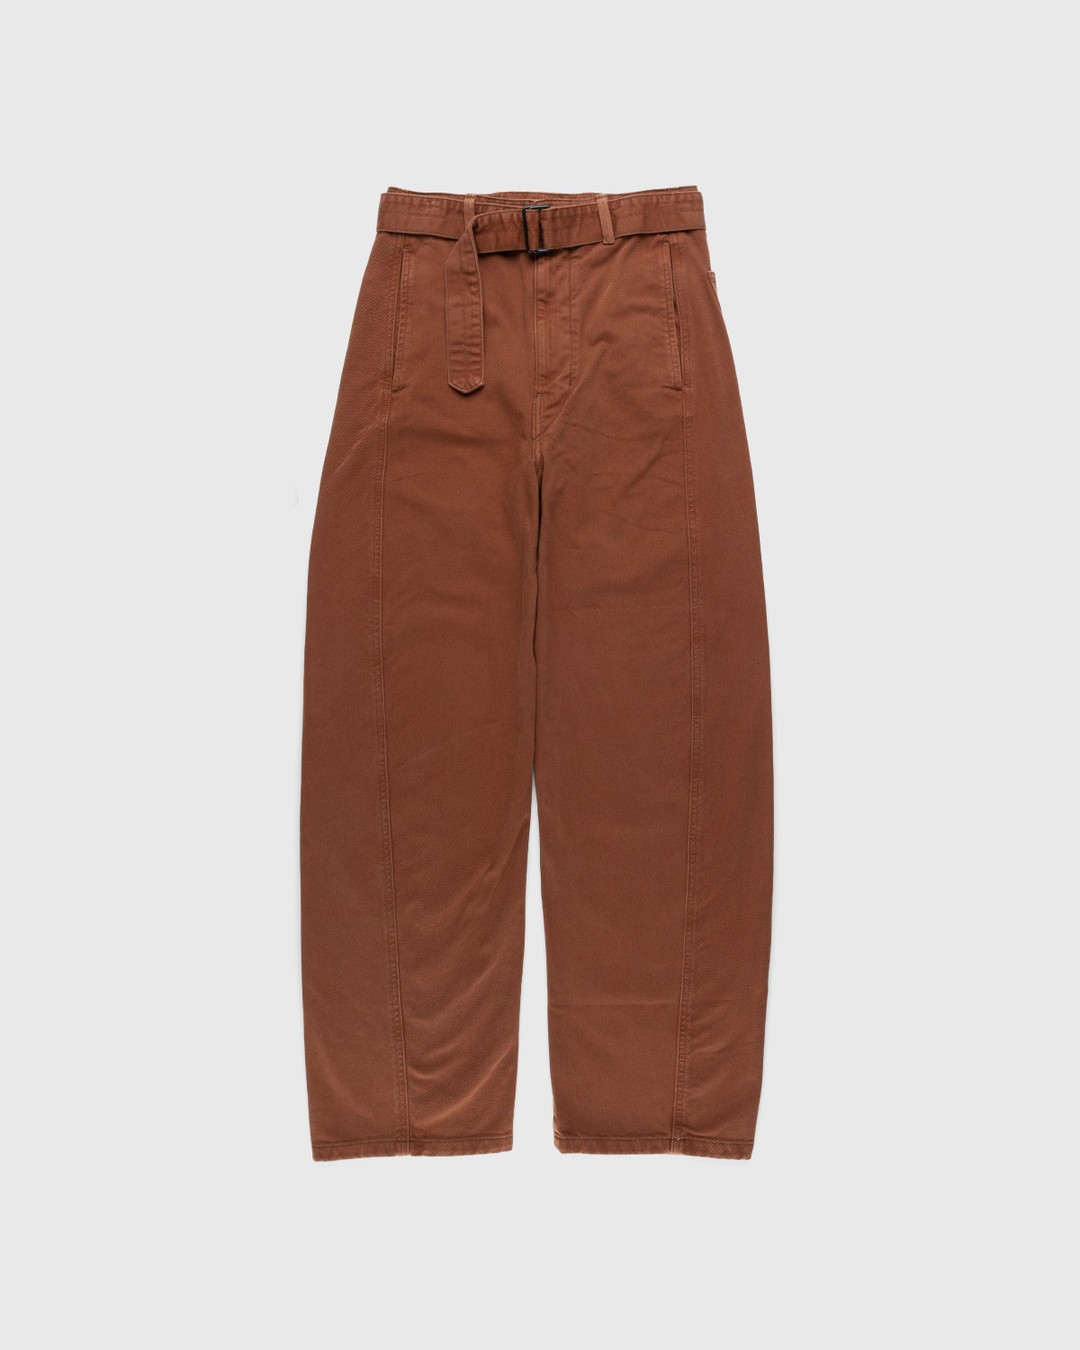 Lemaire – Twisted Belted Pants Brown - Trousers - Brown - Image 1